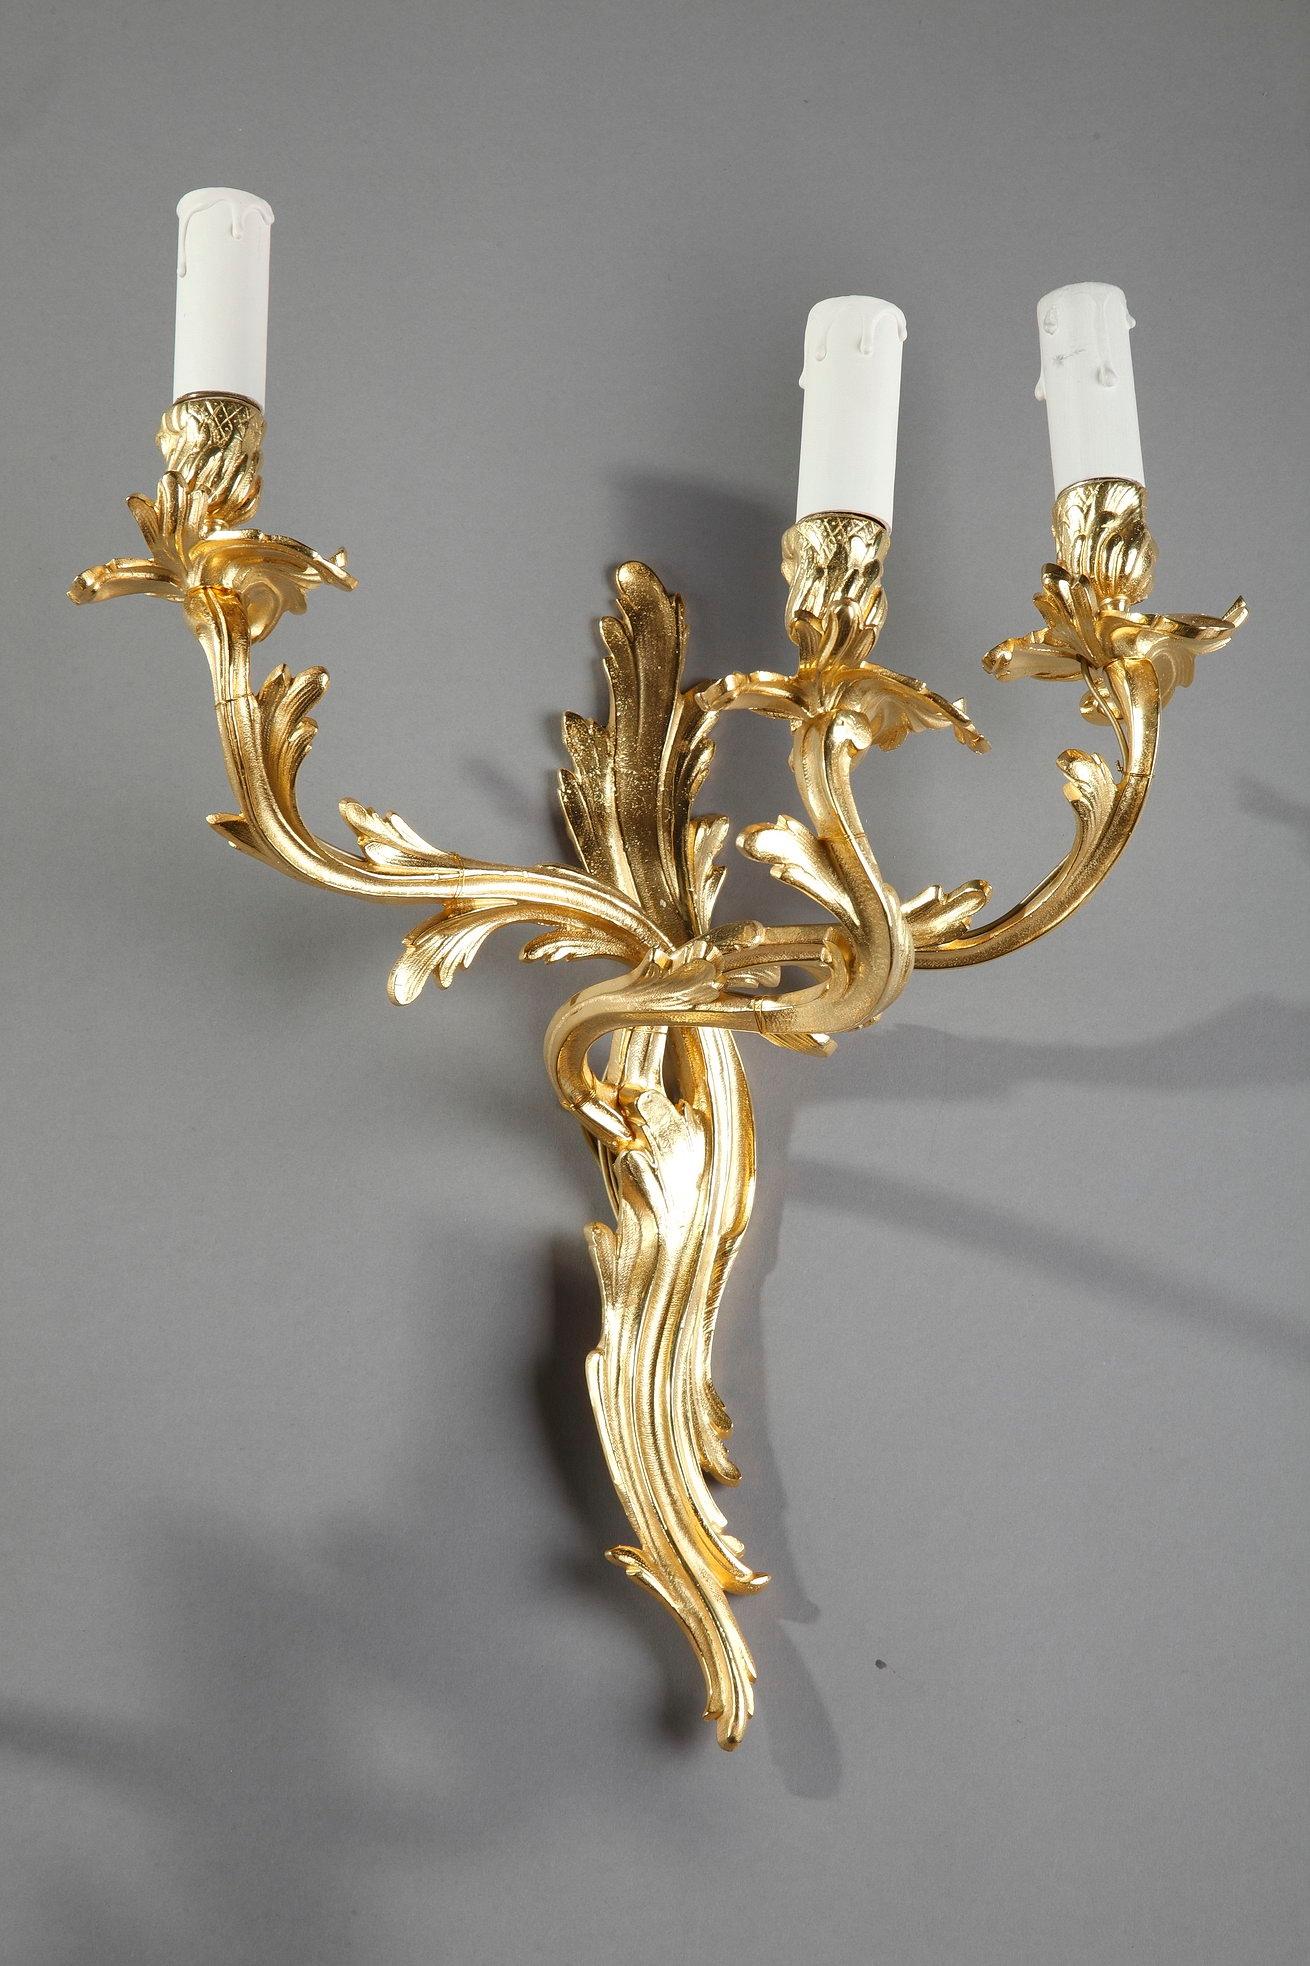 French wall sconces in gilt and chiseled bronze with two lights, richly decorated with flowing and asymmetrical foliage in Louis XV style. This rich and asymmetrical rococo-inspired decoration was widely imitated in the second half of the 19th